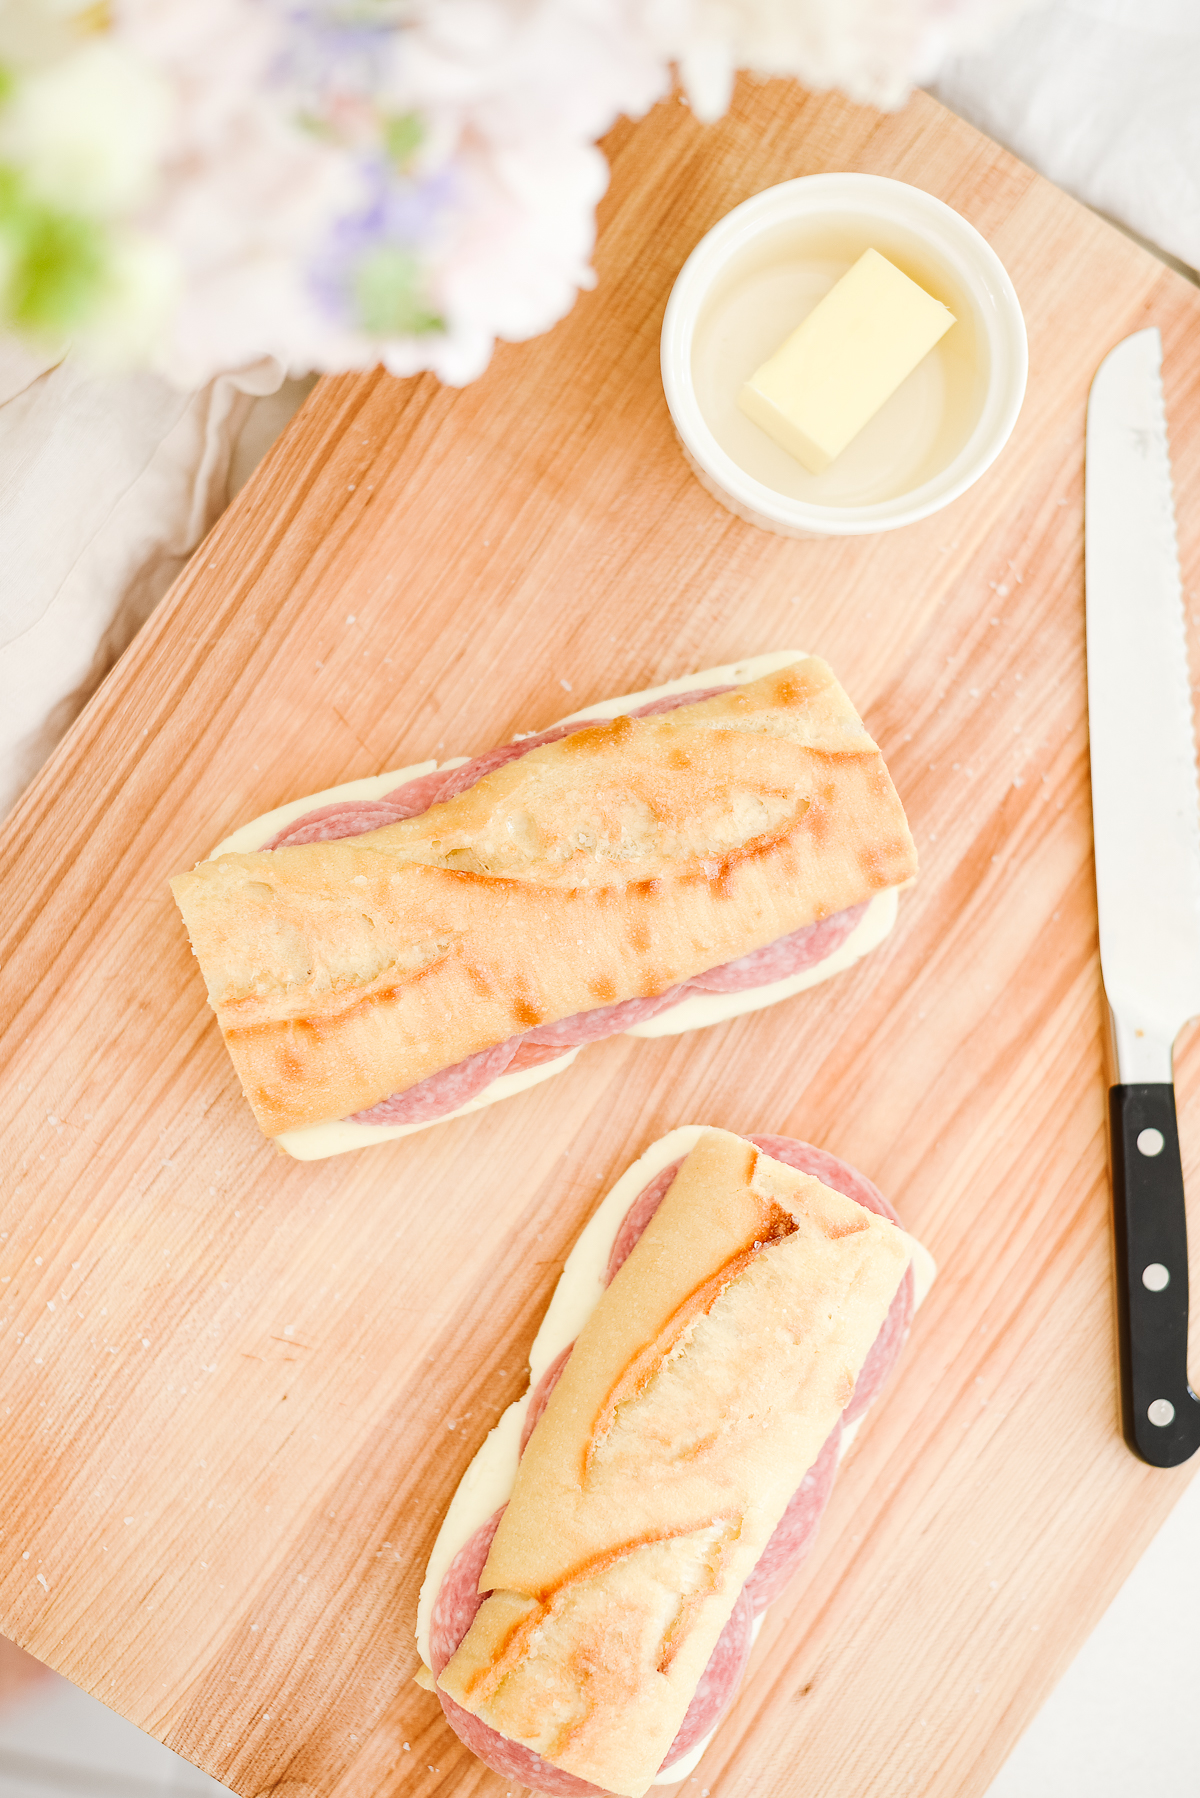 Picnic sandwiches on crusty bread, on a wooden cutting board with a knife to the side.